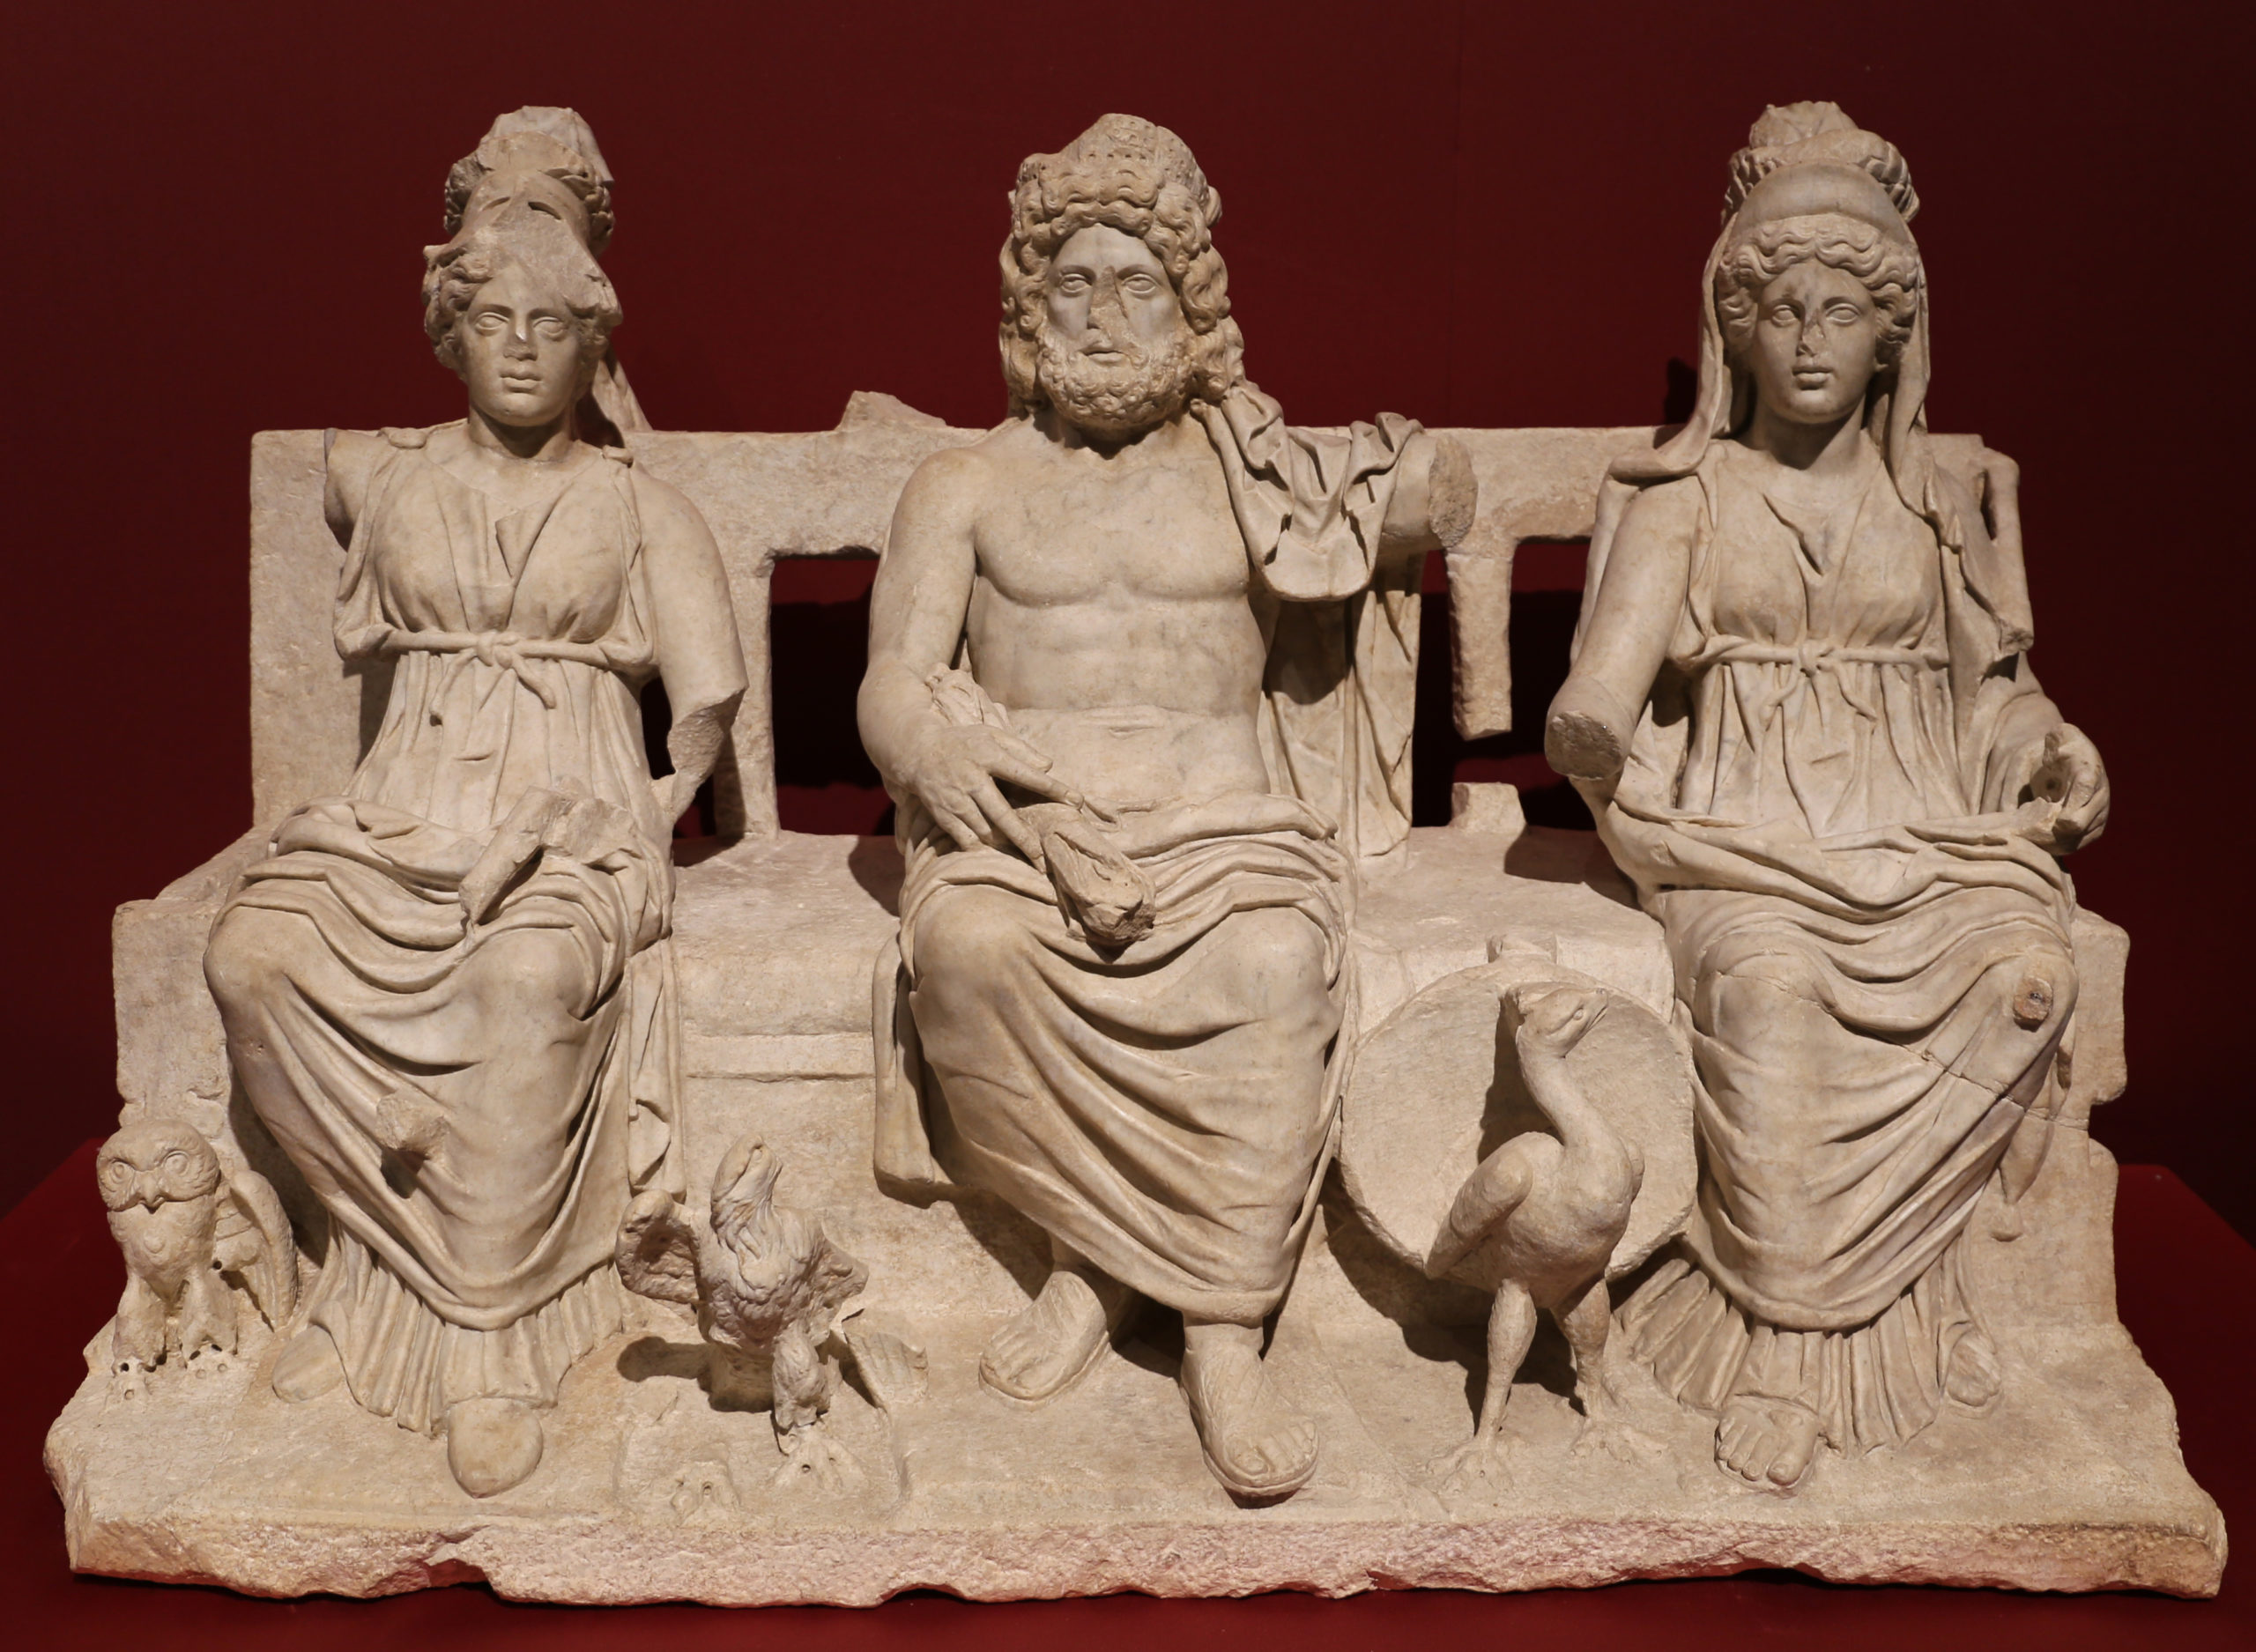 Seated robed figures of Minerva, Jupiter, and Juno. Each has a symbolic bird at their feet: Athena an owl, Jupiter and eagle, and Juno a peacock.